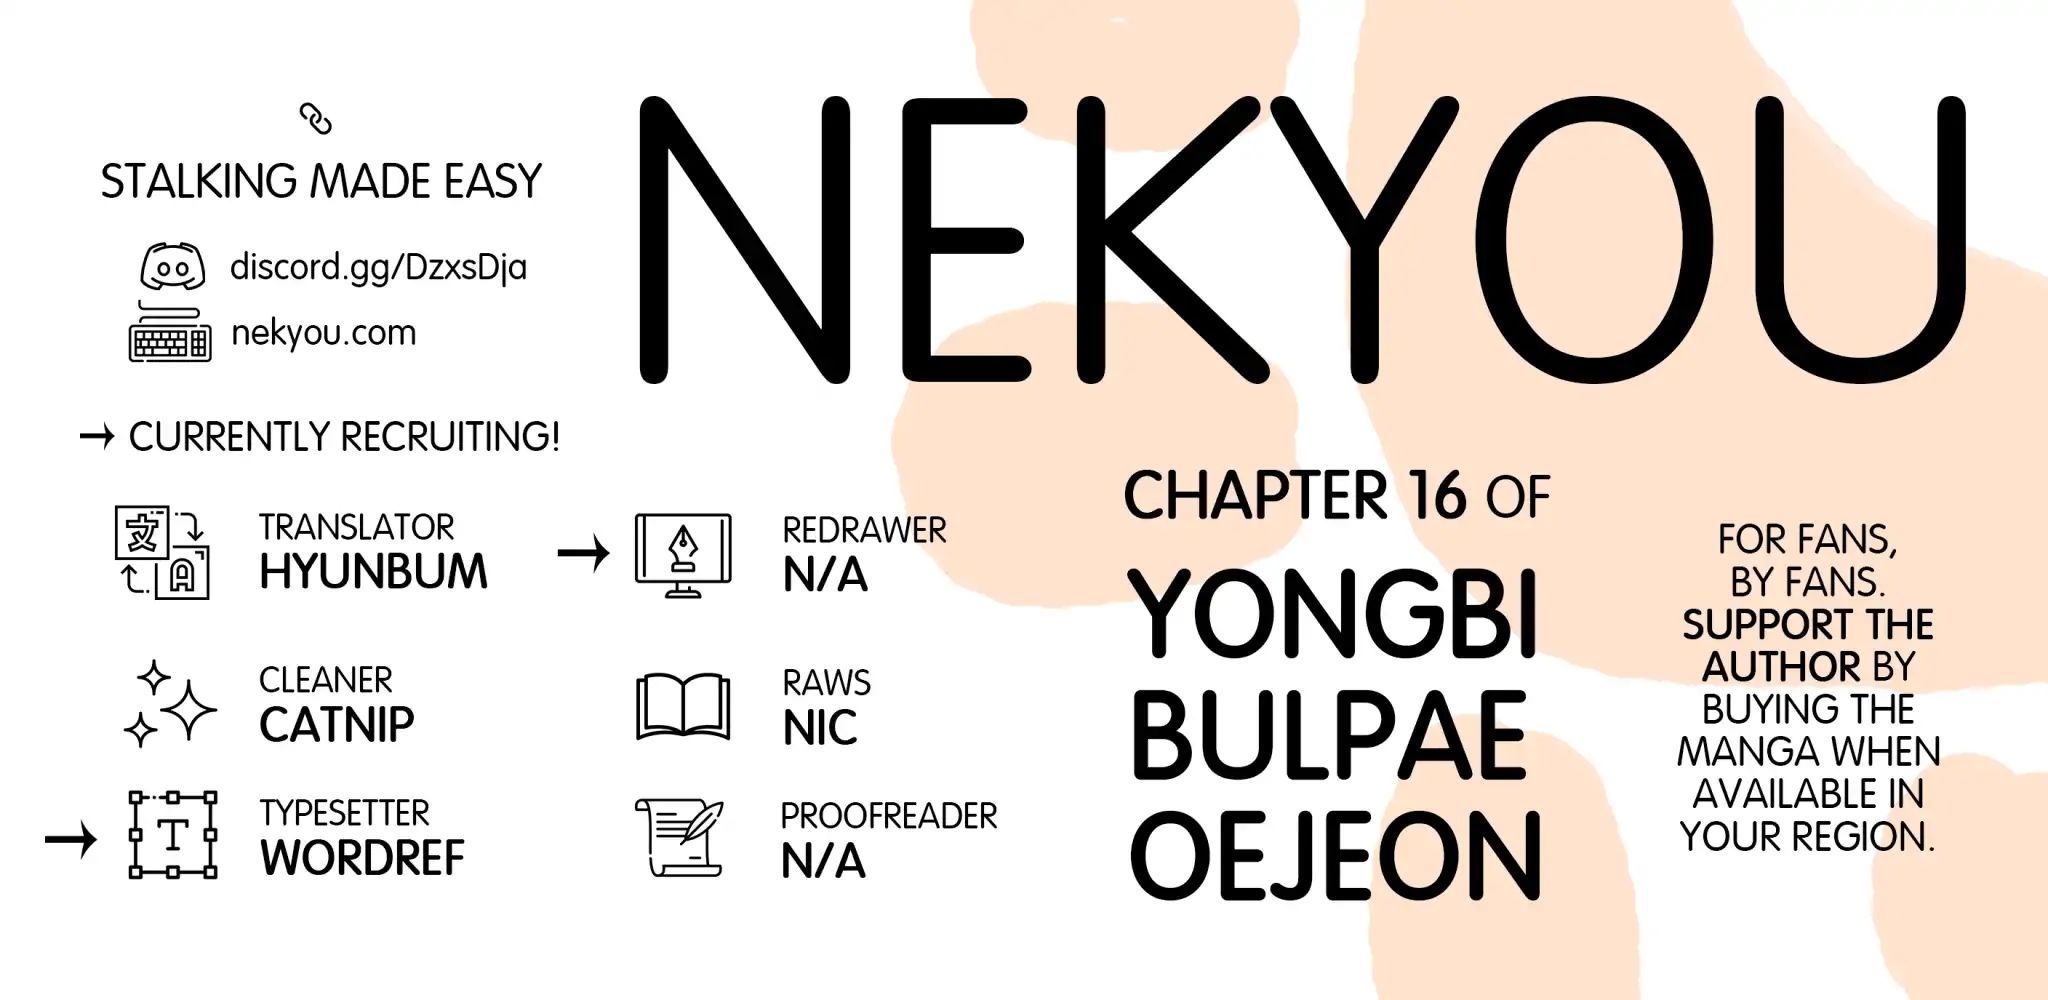 Yongbi the Invincible - A Side Story Chapter 16